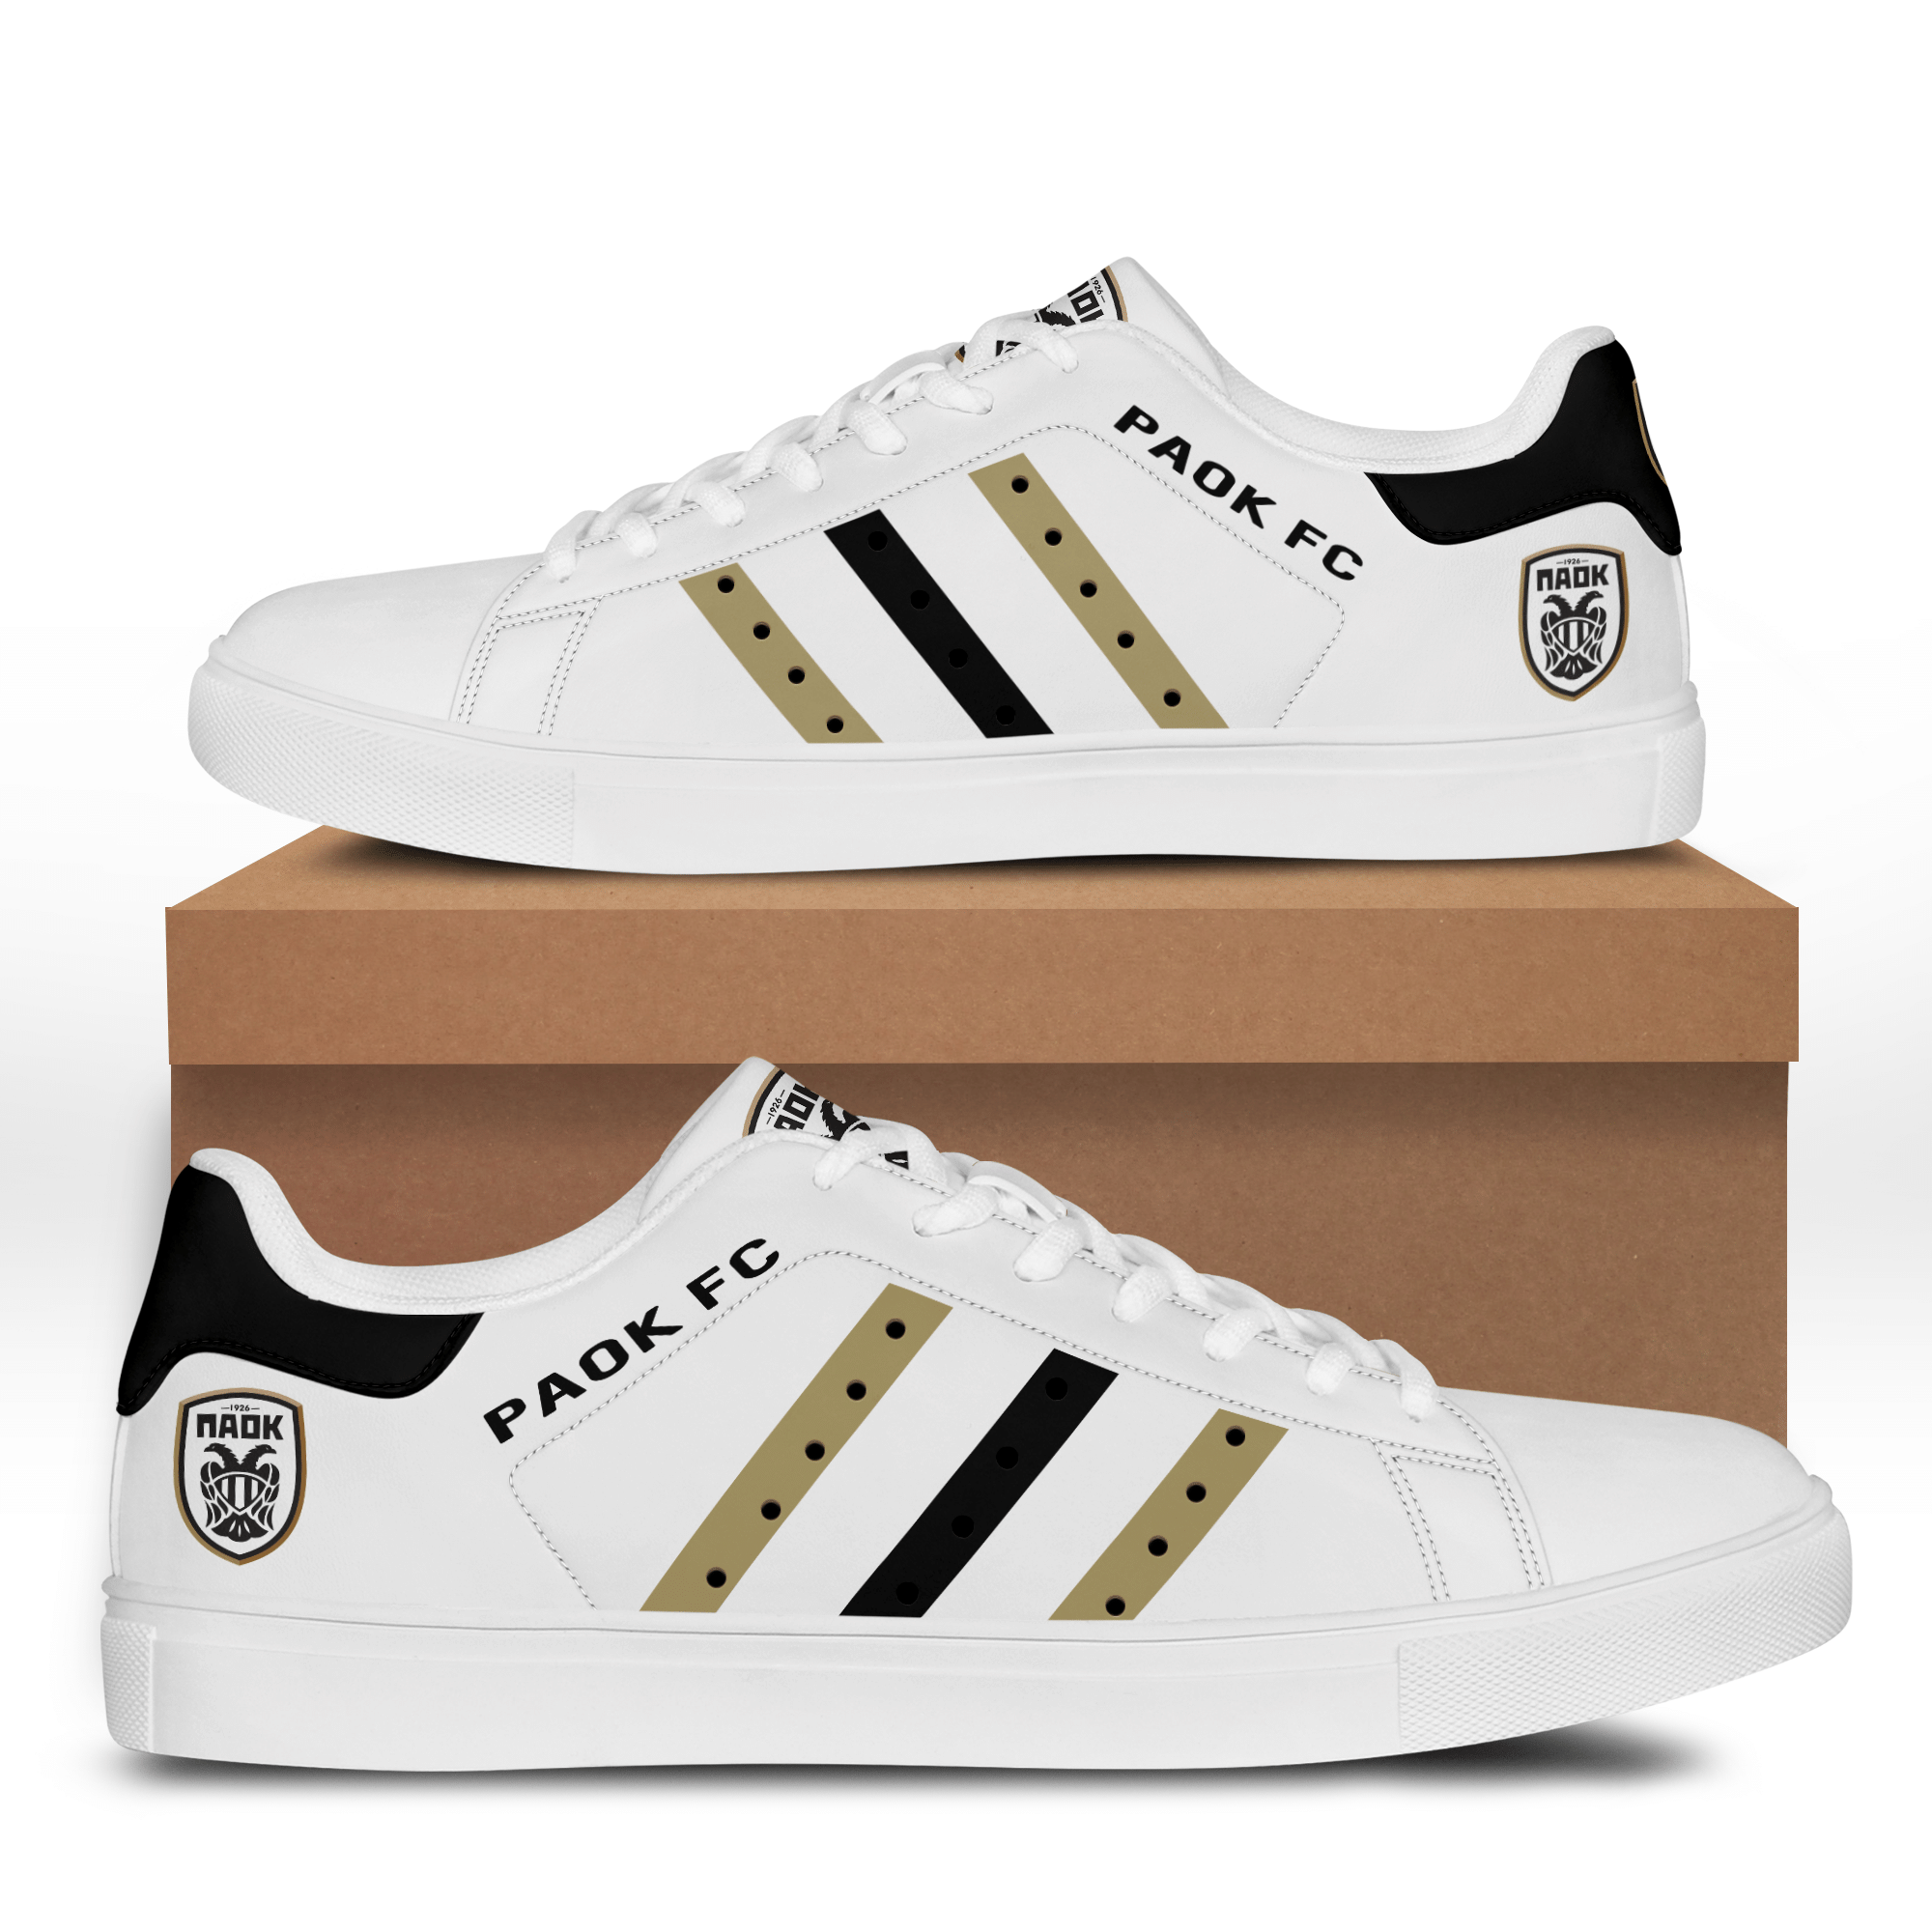 Paok Fc Low Top Shoes – V6